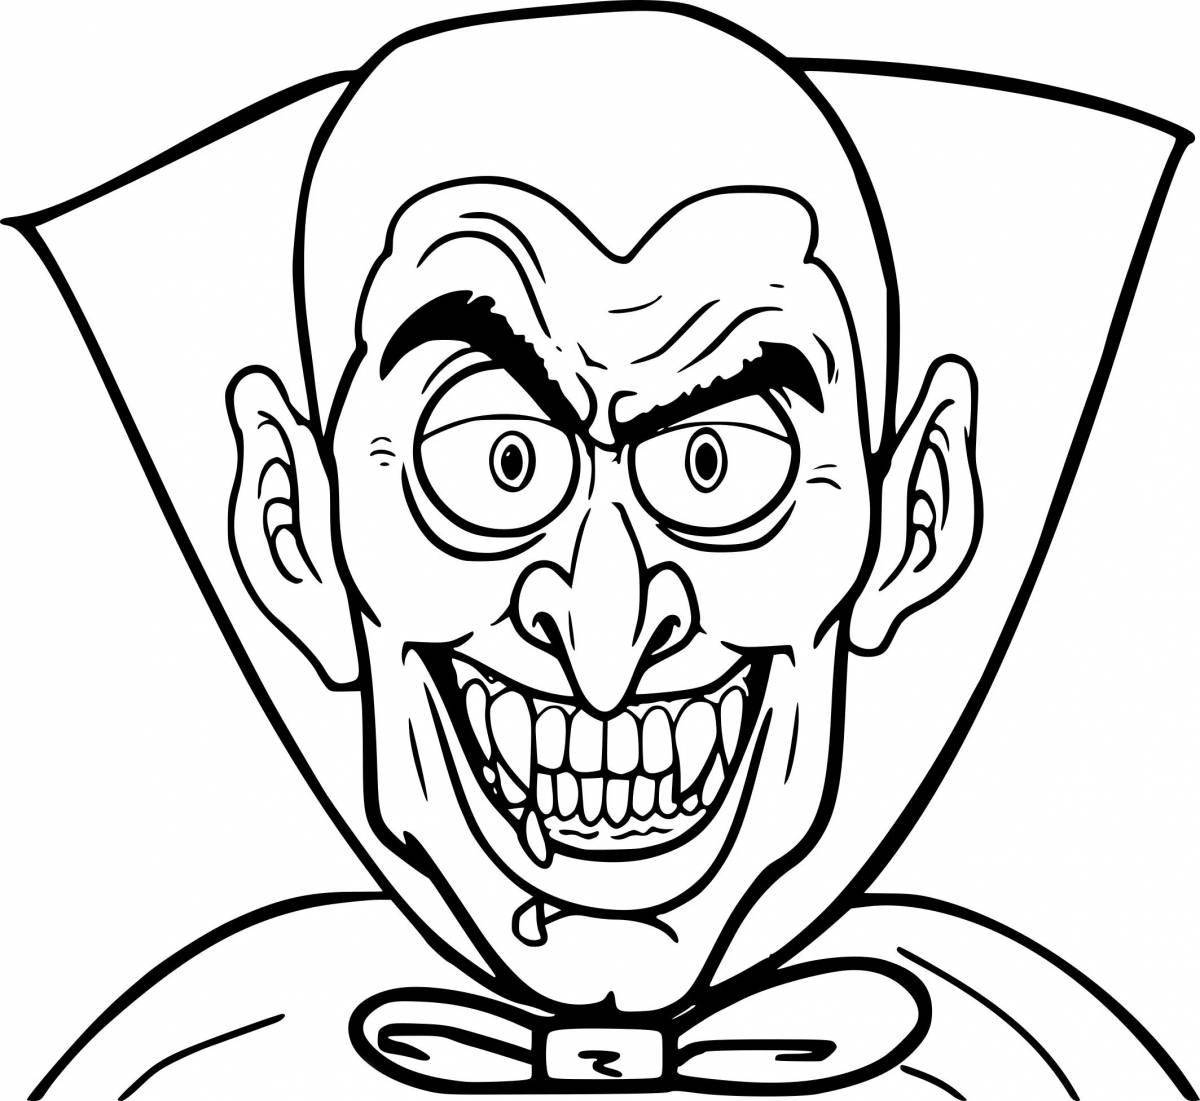 Vampire threat coloring page